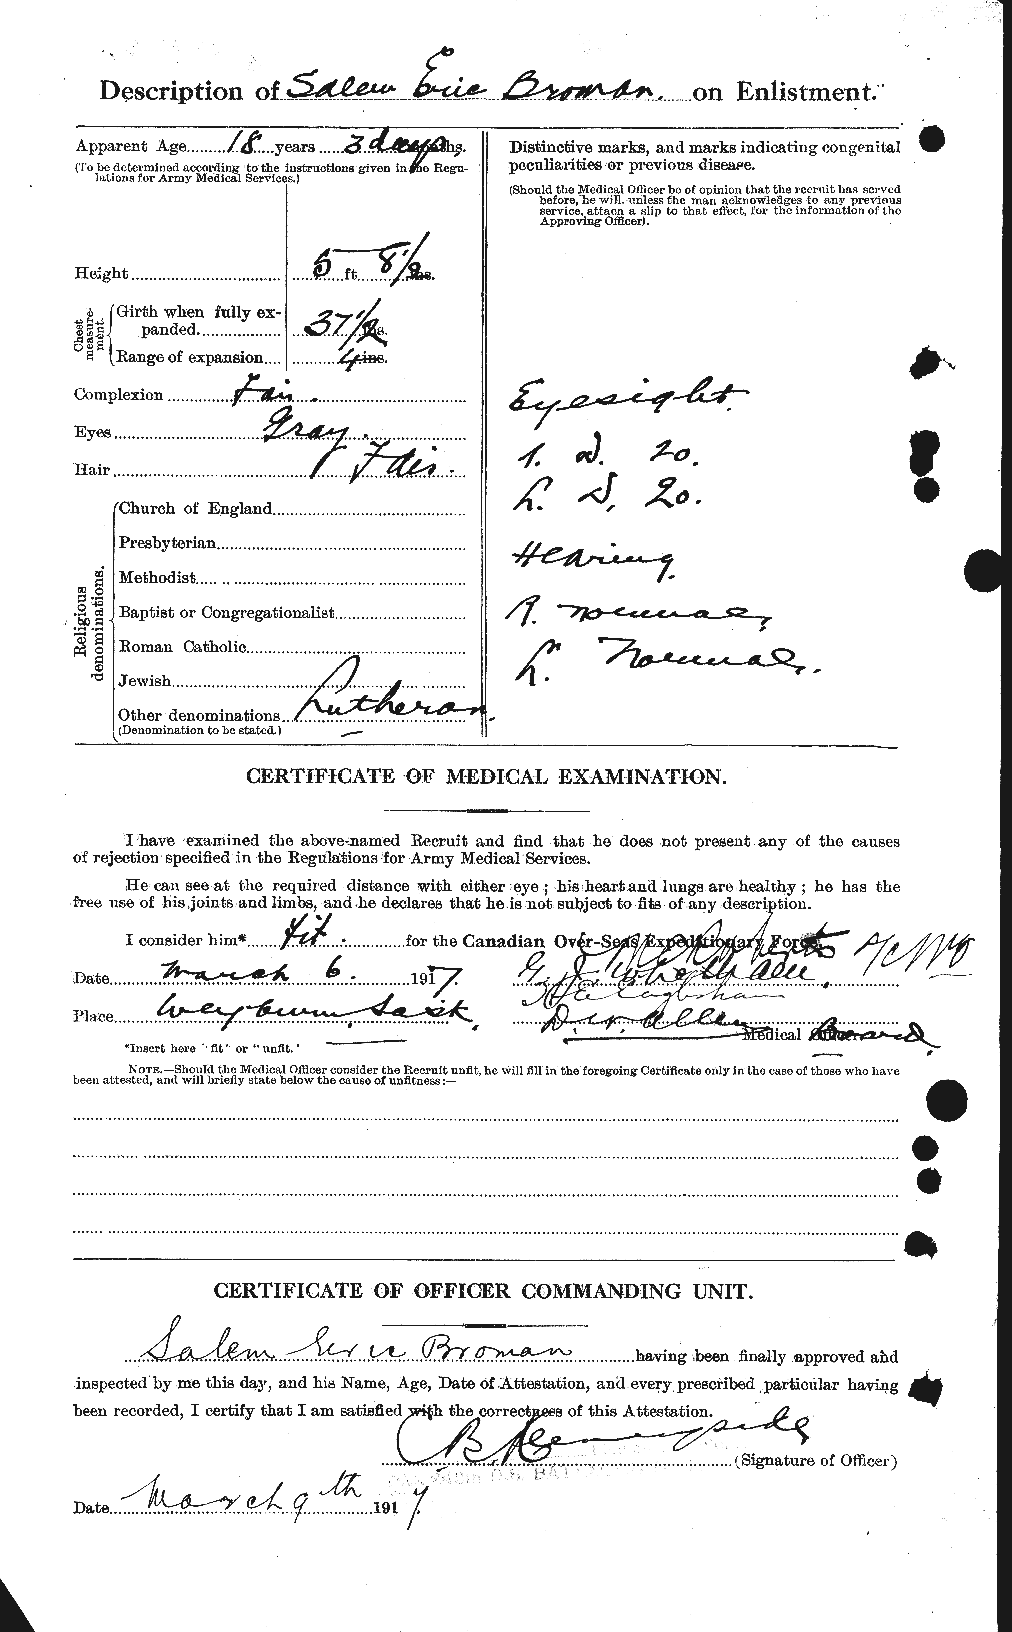 Personnel Records of the First World War - CEF 262124b